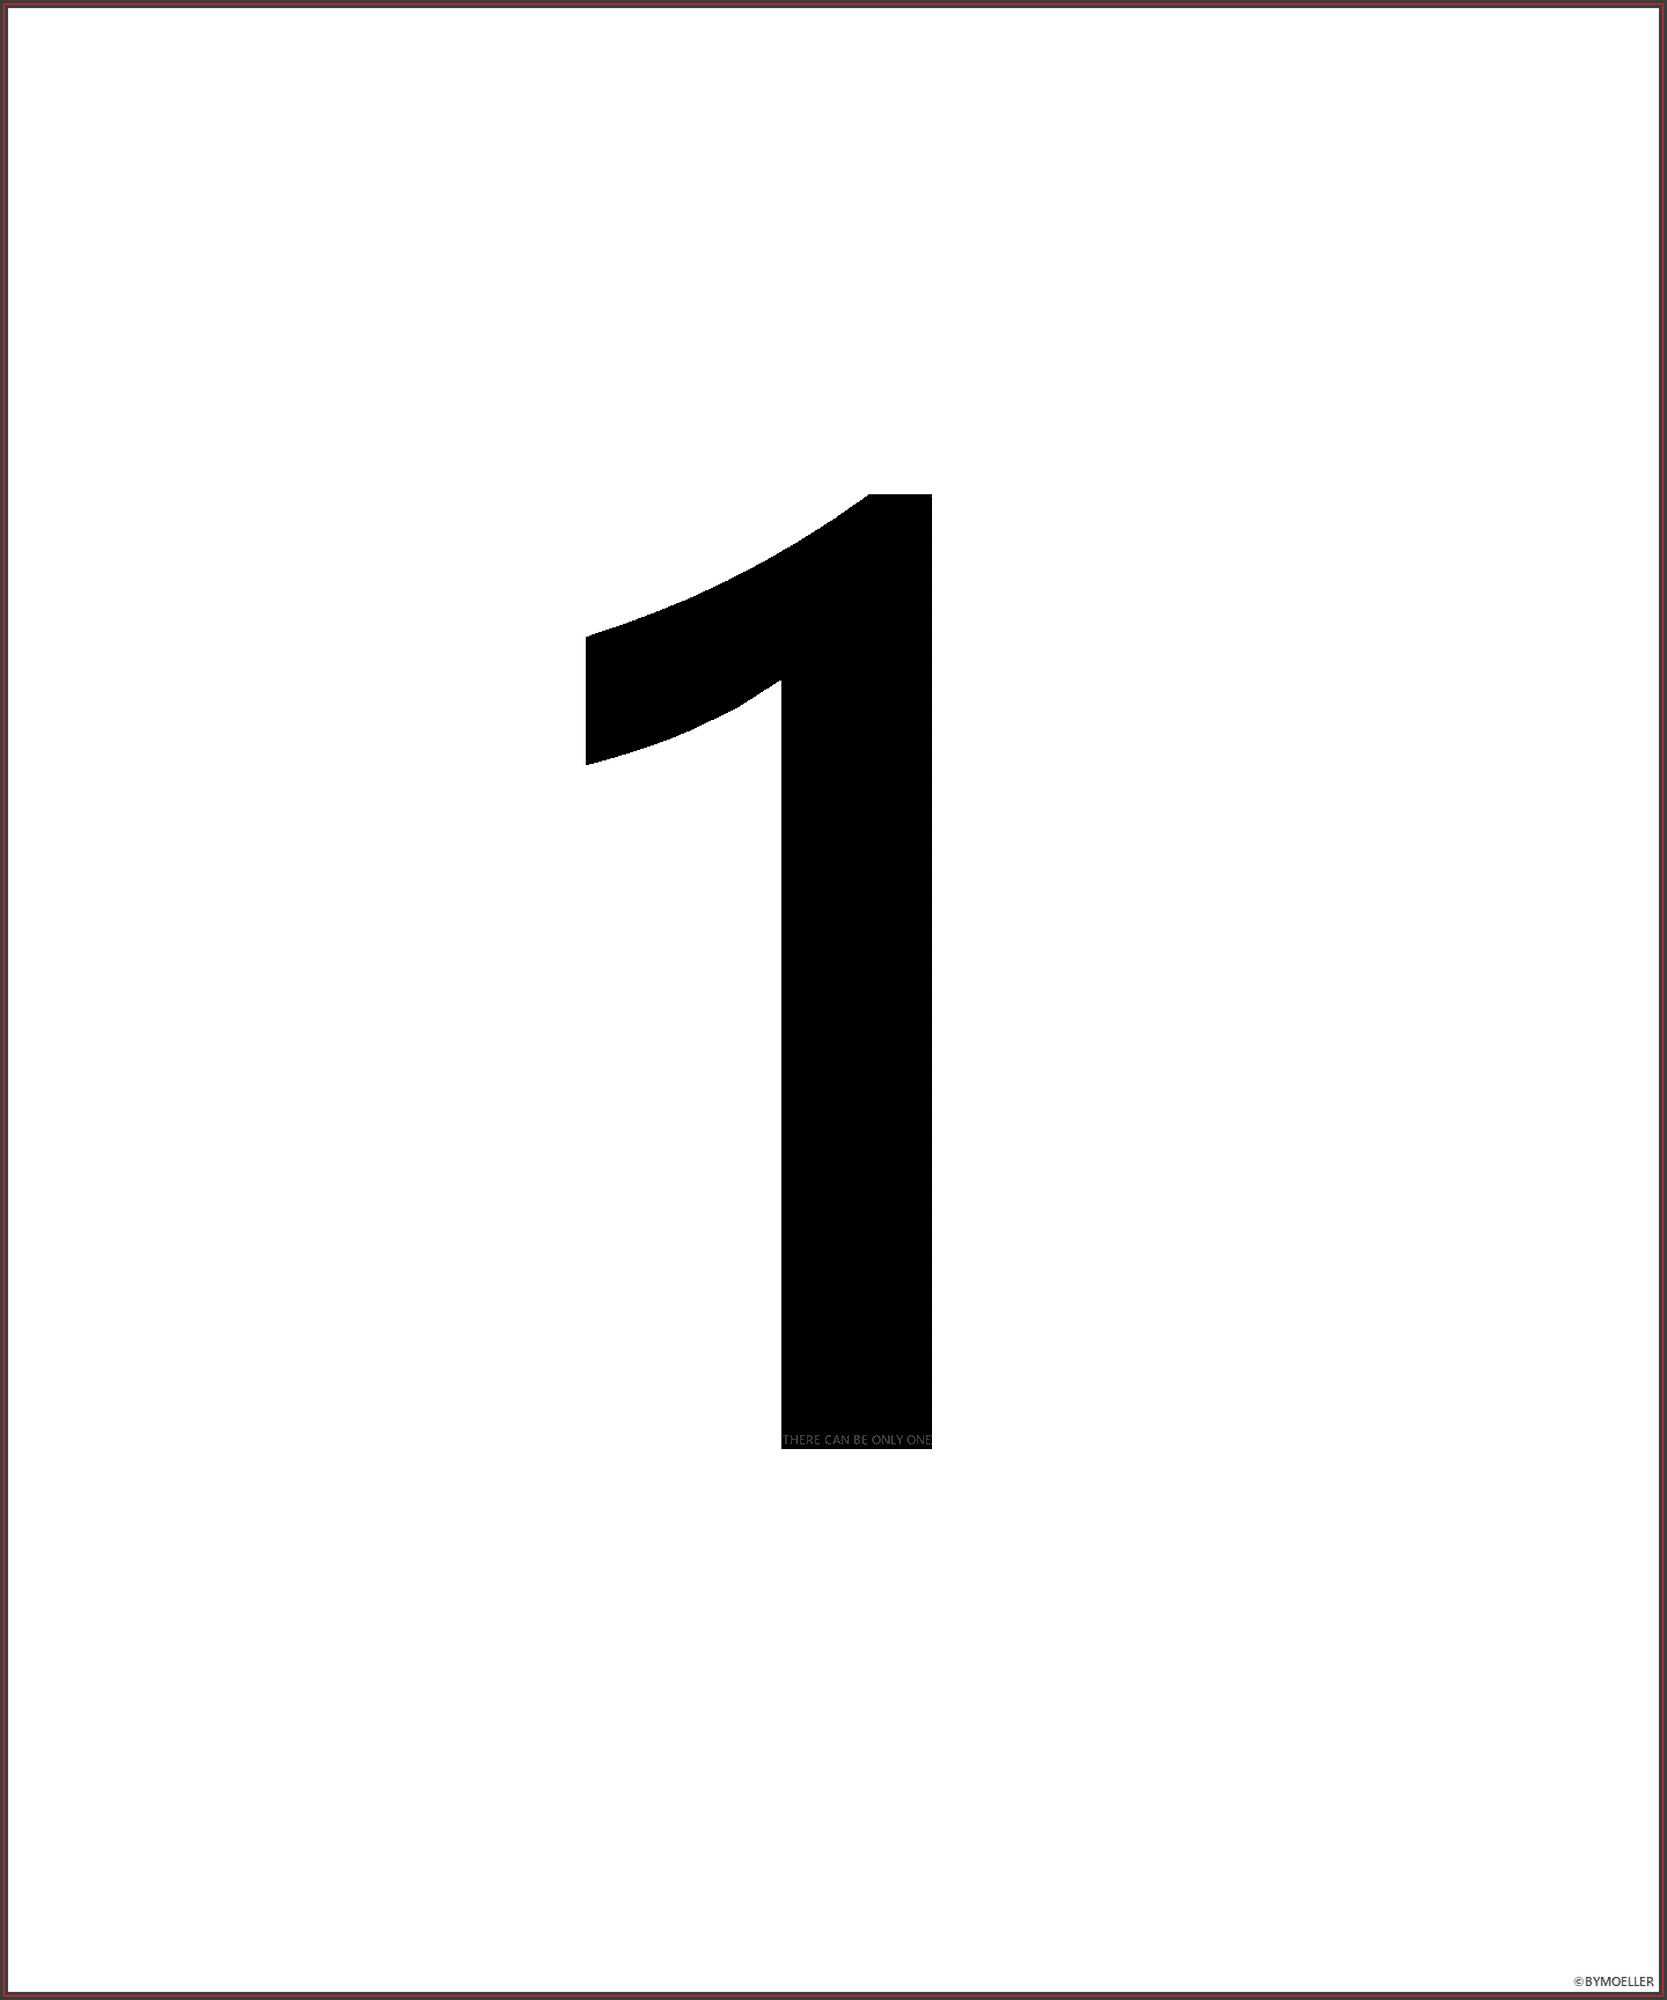 1 - One